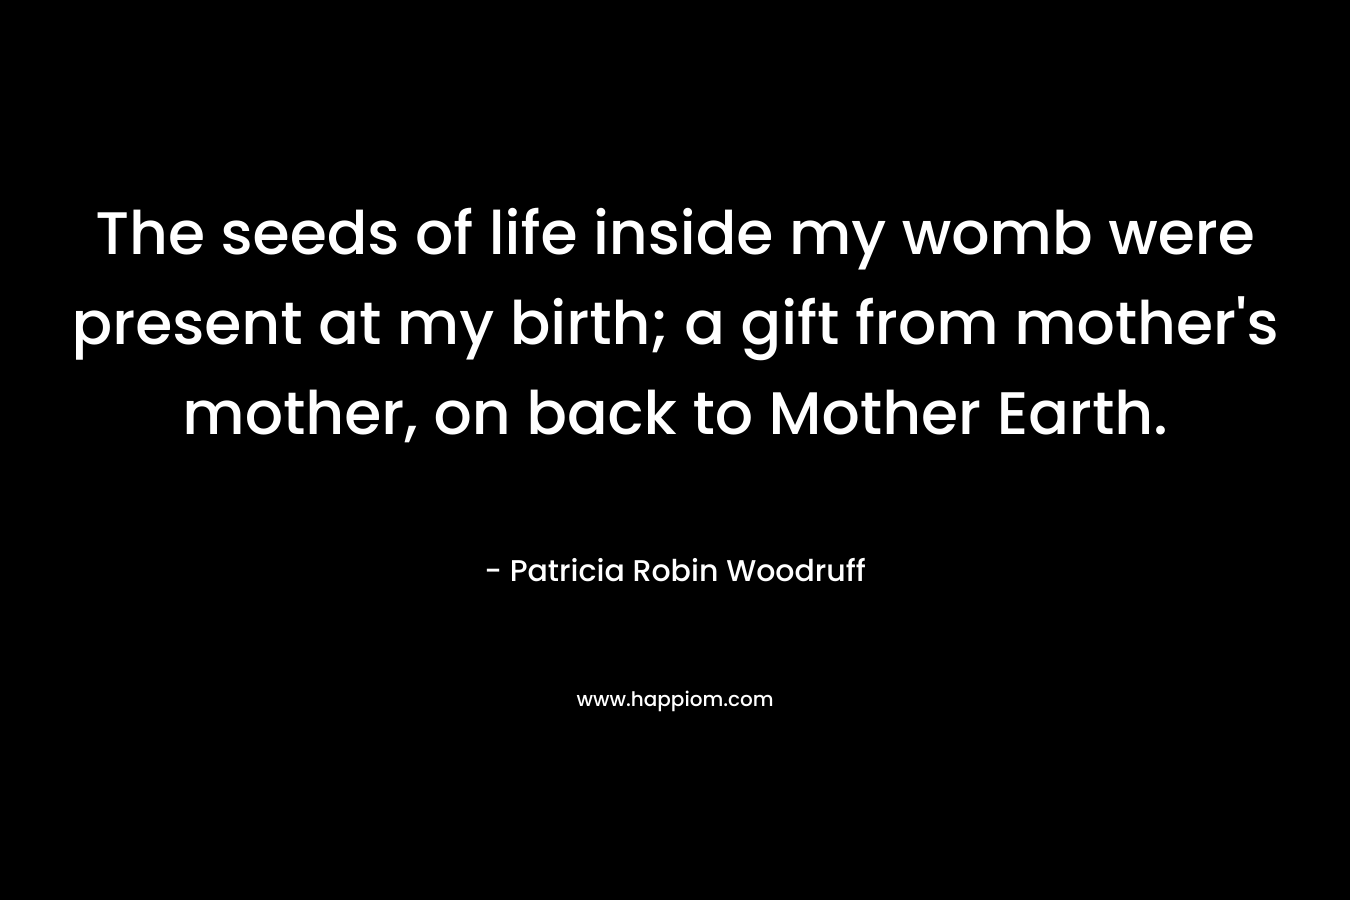 The seeds of life inside my womb were present at my birth; a gift from mother's mother, on back to Mother Earth.